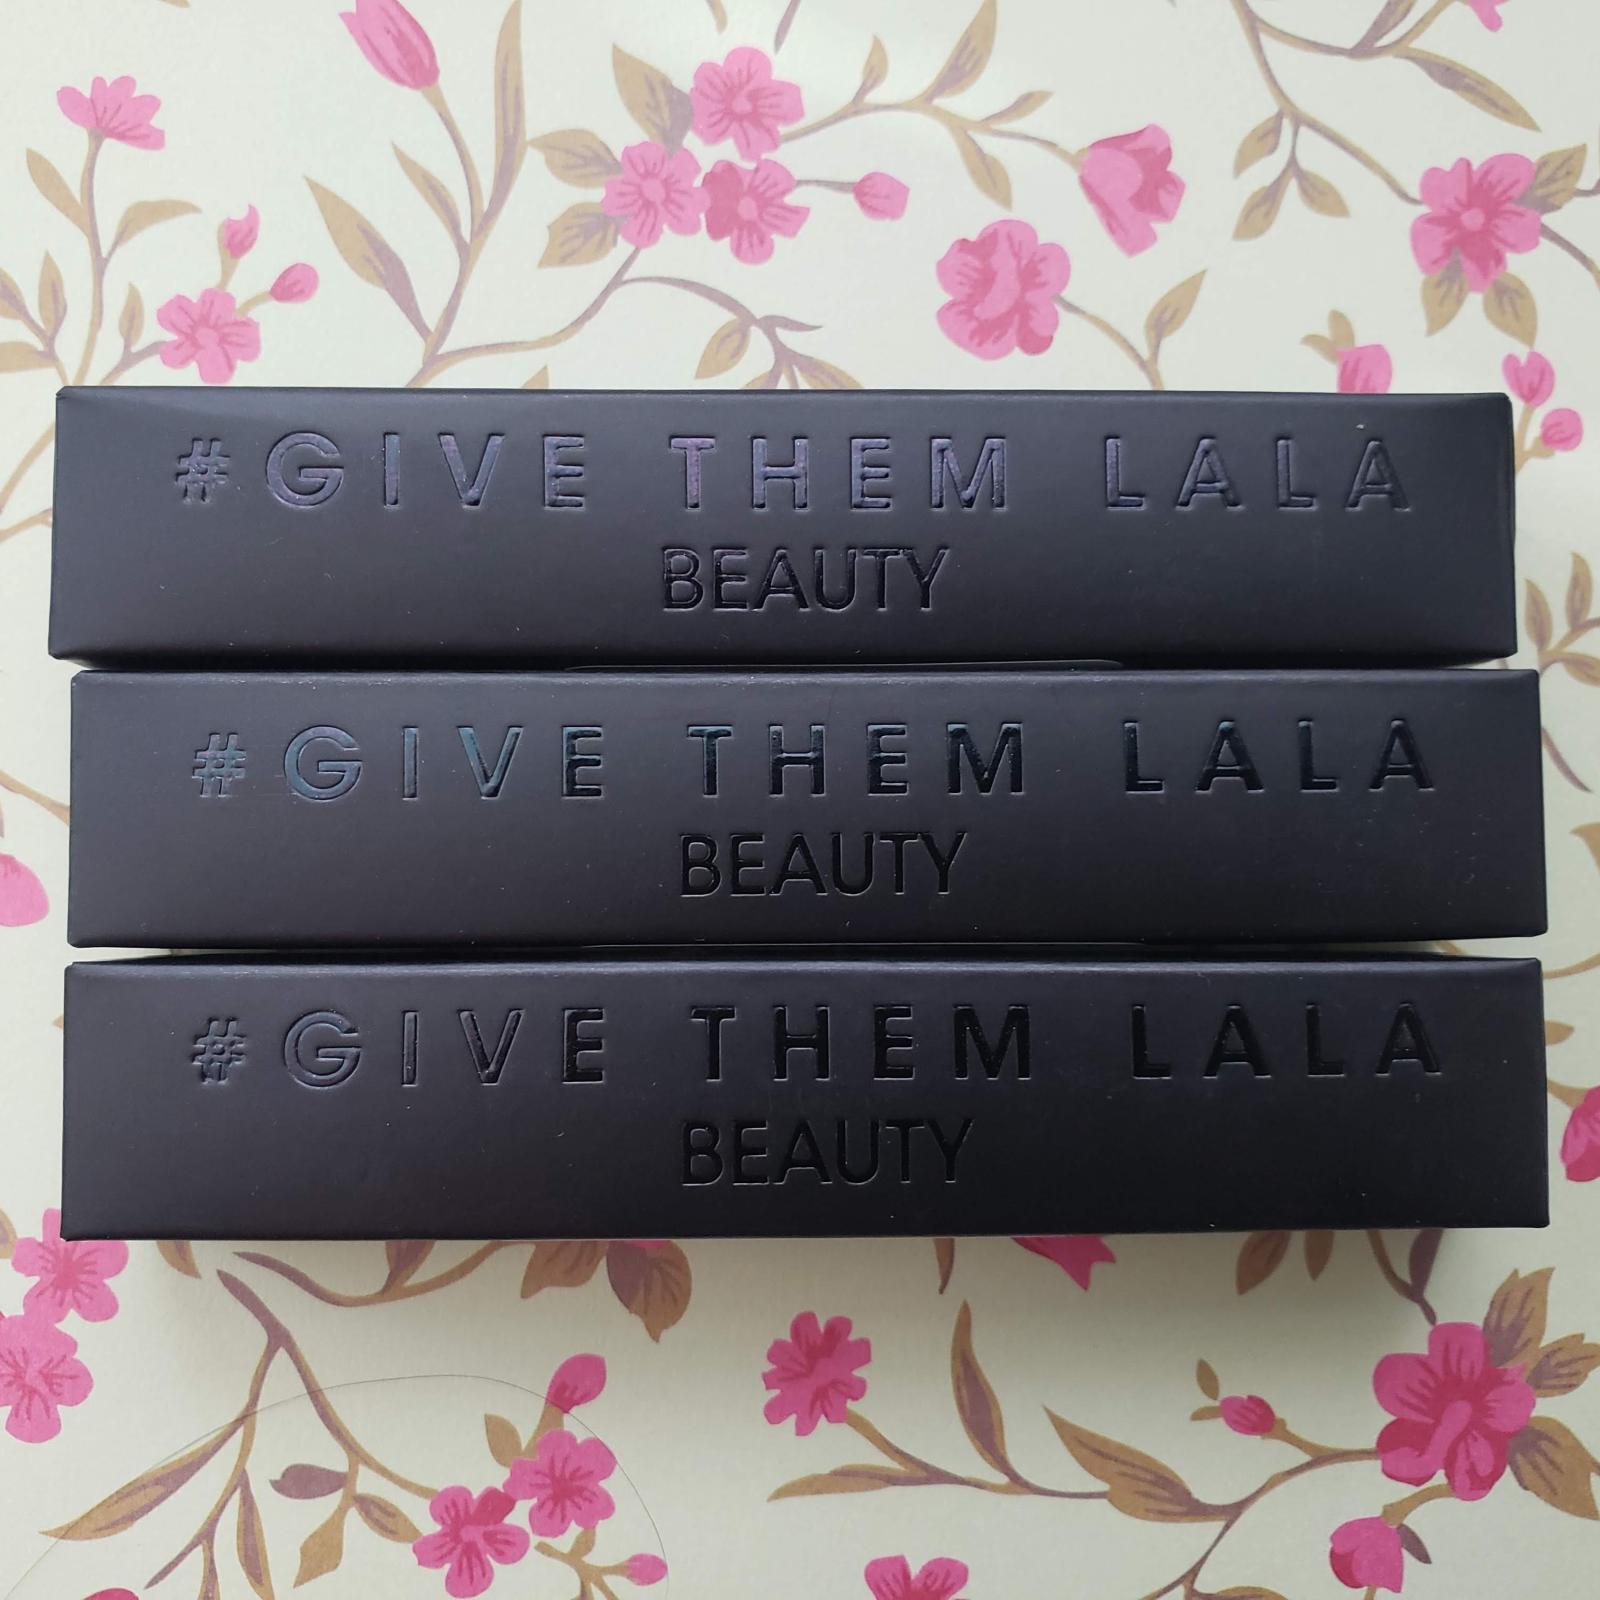 Give Them Lala Beauty Full Collection Lip Gloss And Cream Lipstick Review And Swatches Front